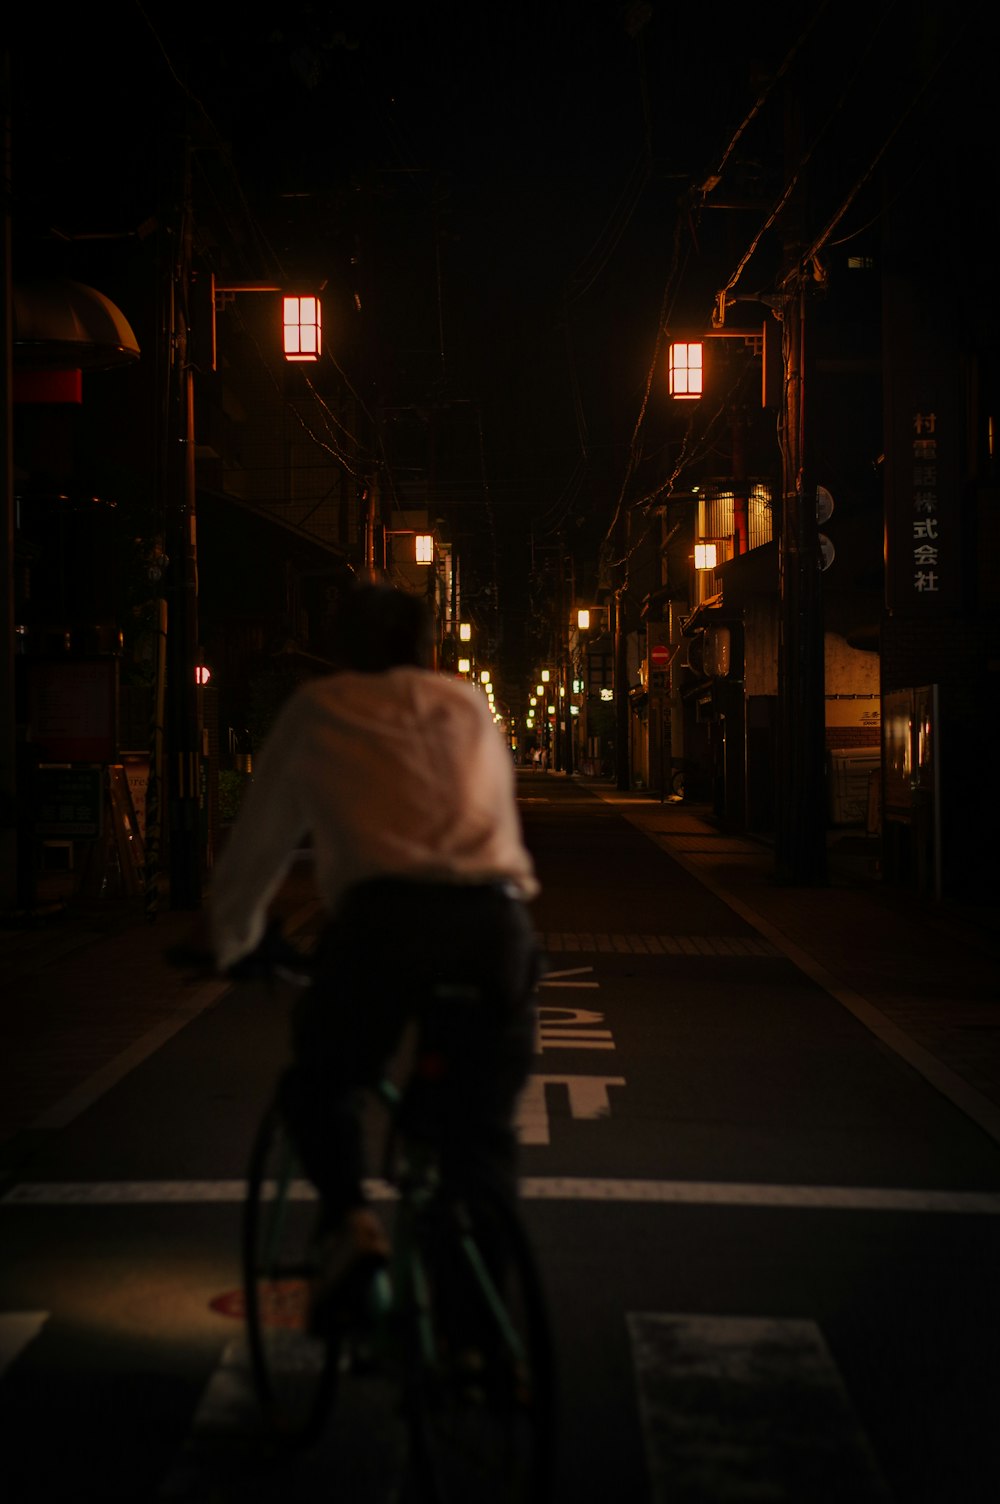 a person riding a bicycle on a street at night